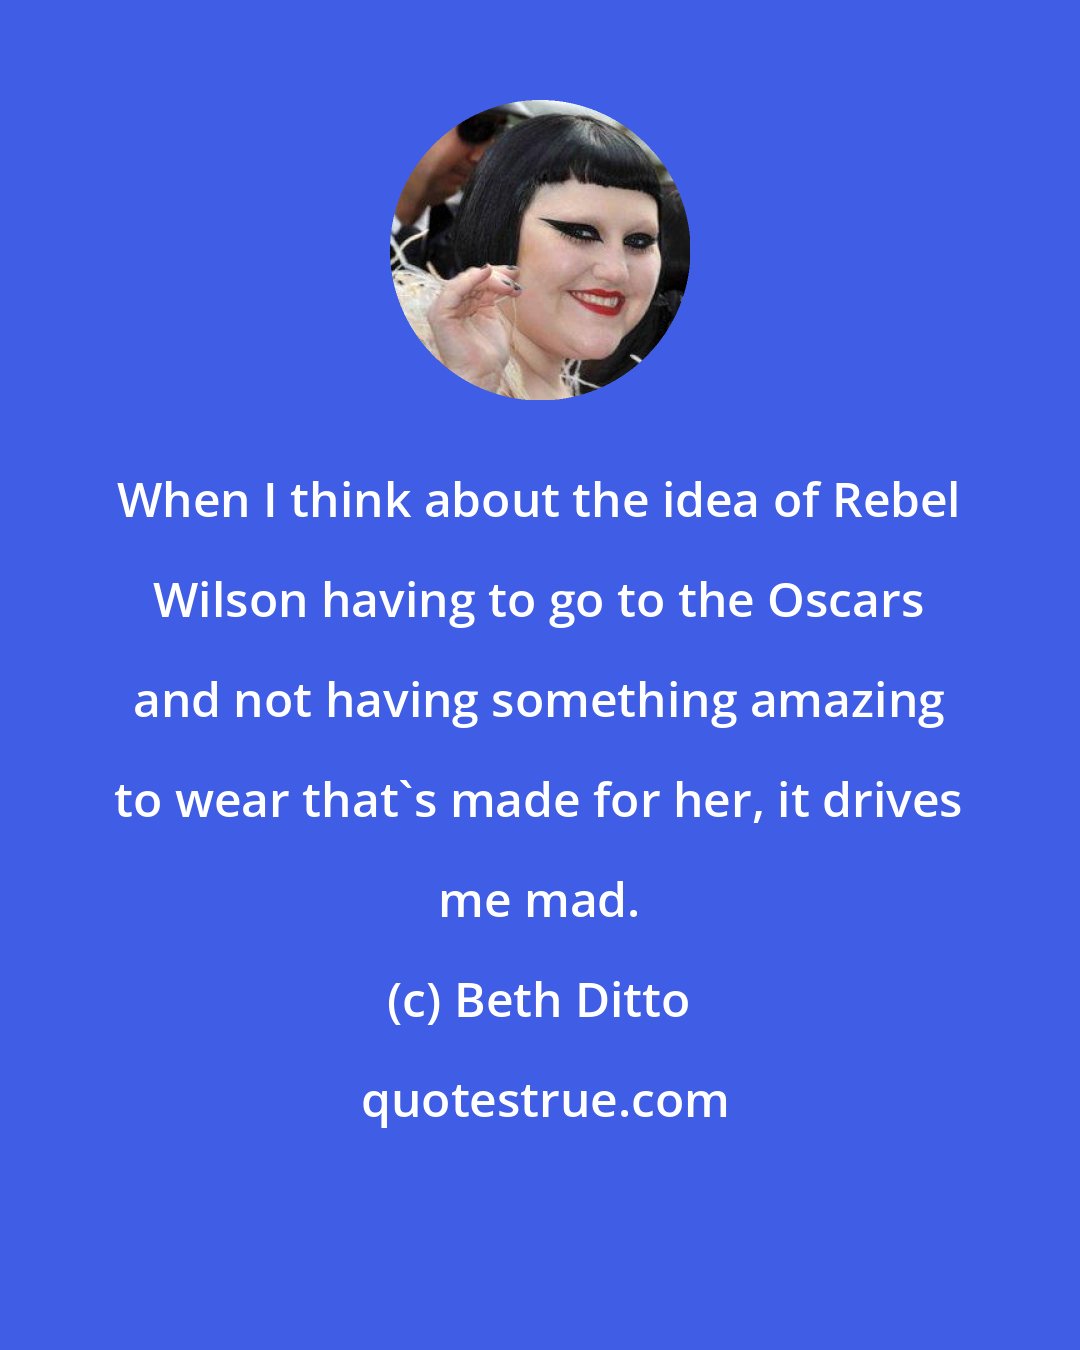 Beth Ditto: When I think about the idea of Rebel Wilson having to go to the Oscars and not having something amazing to wear that's made for her, it drives me mad.